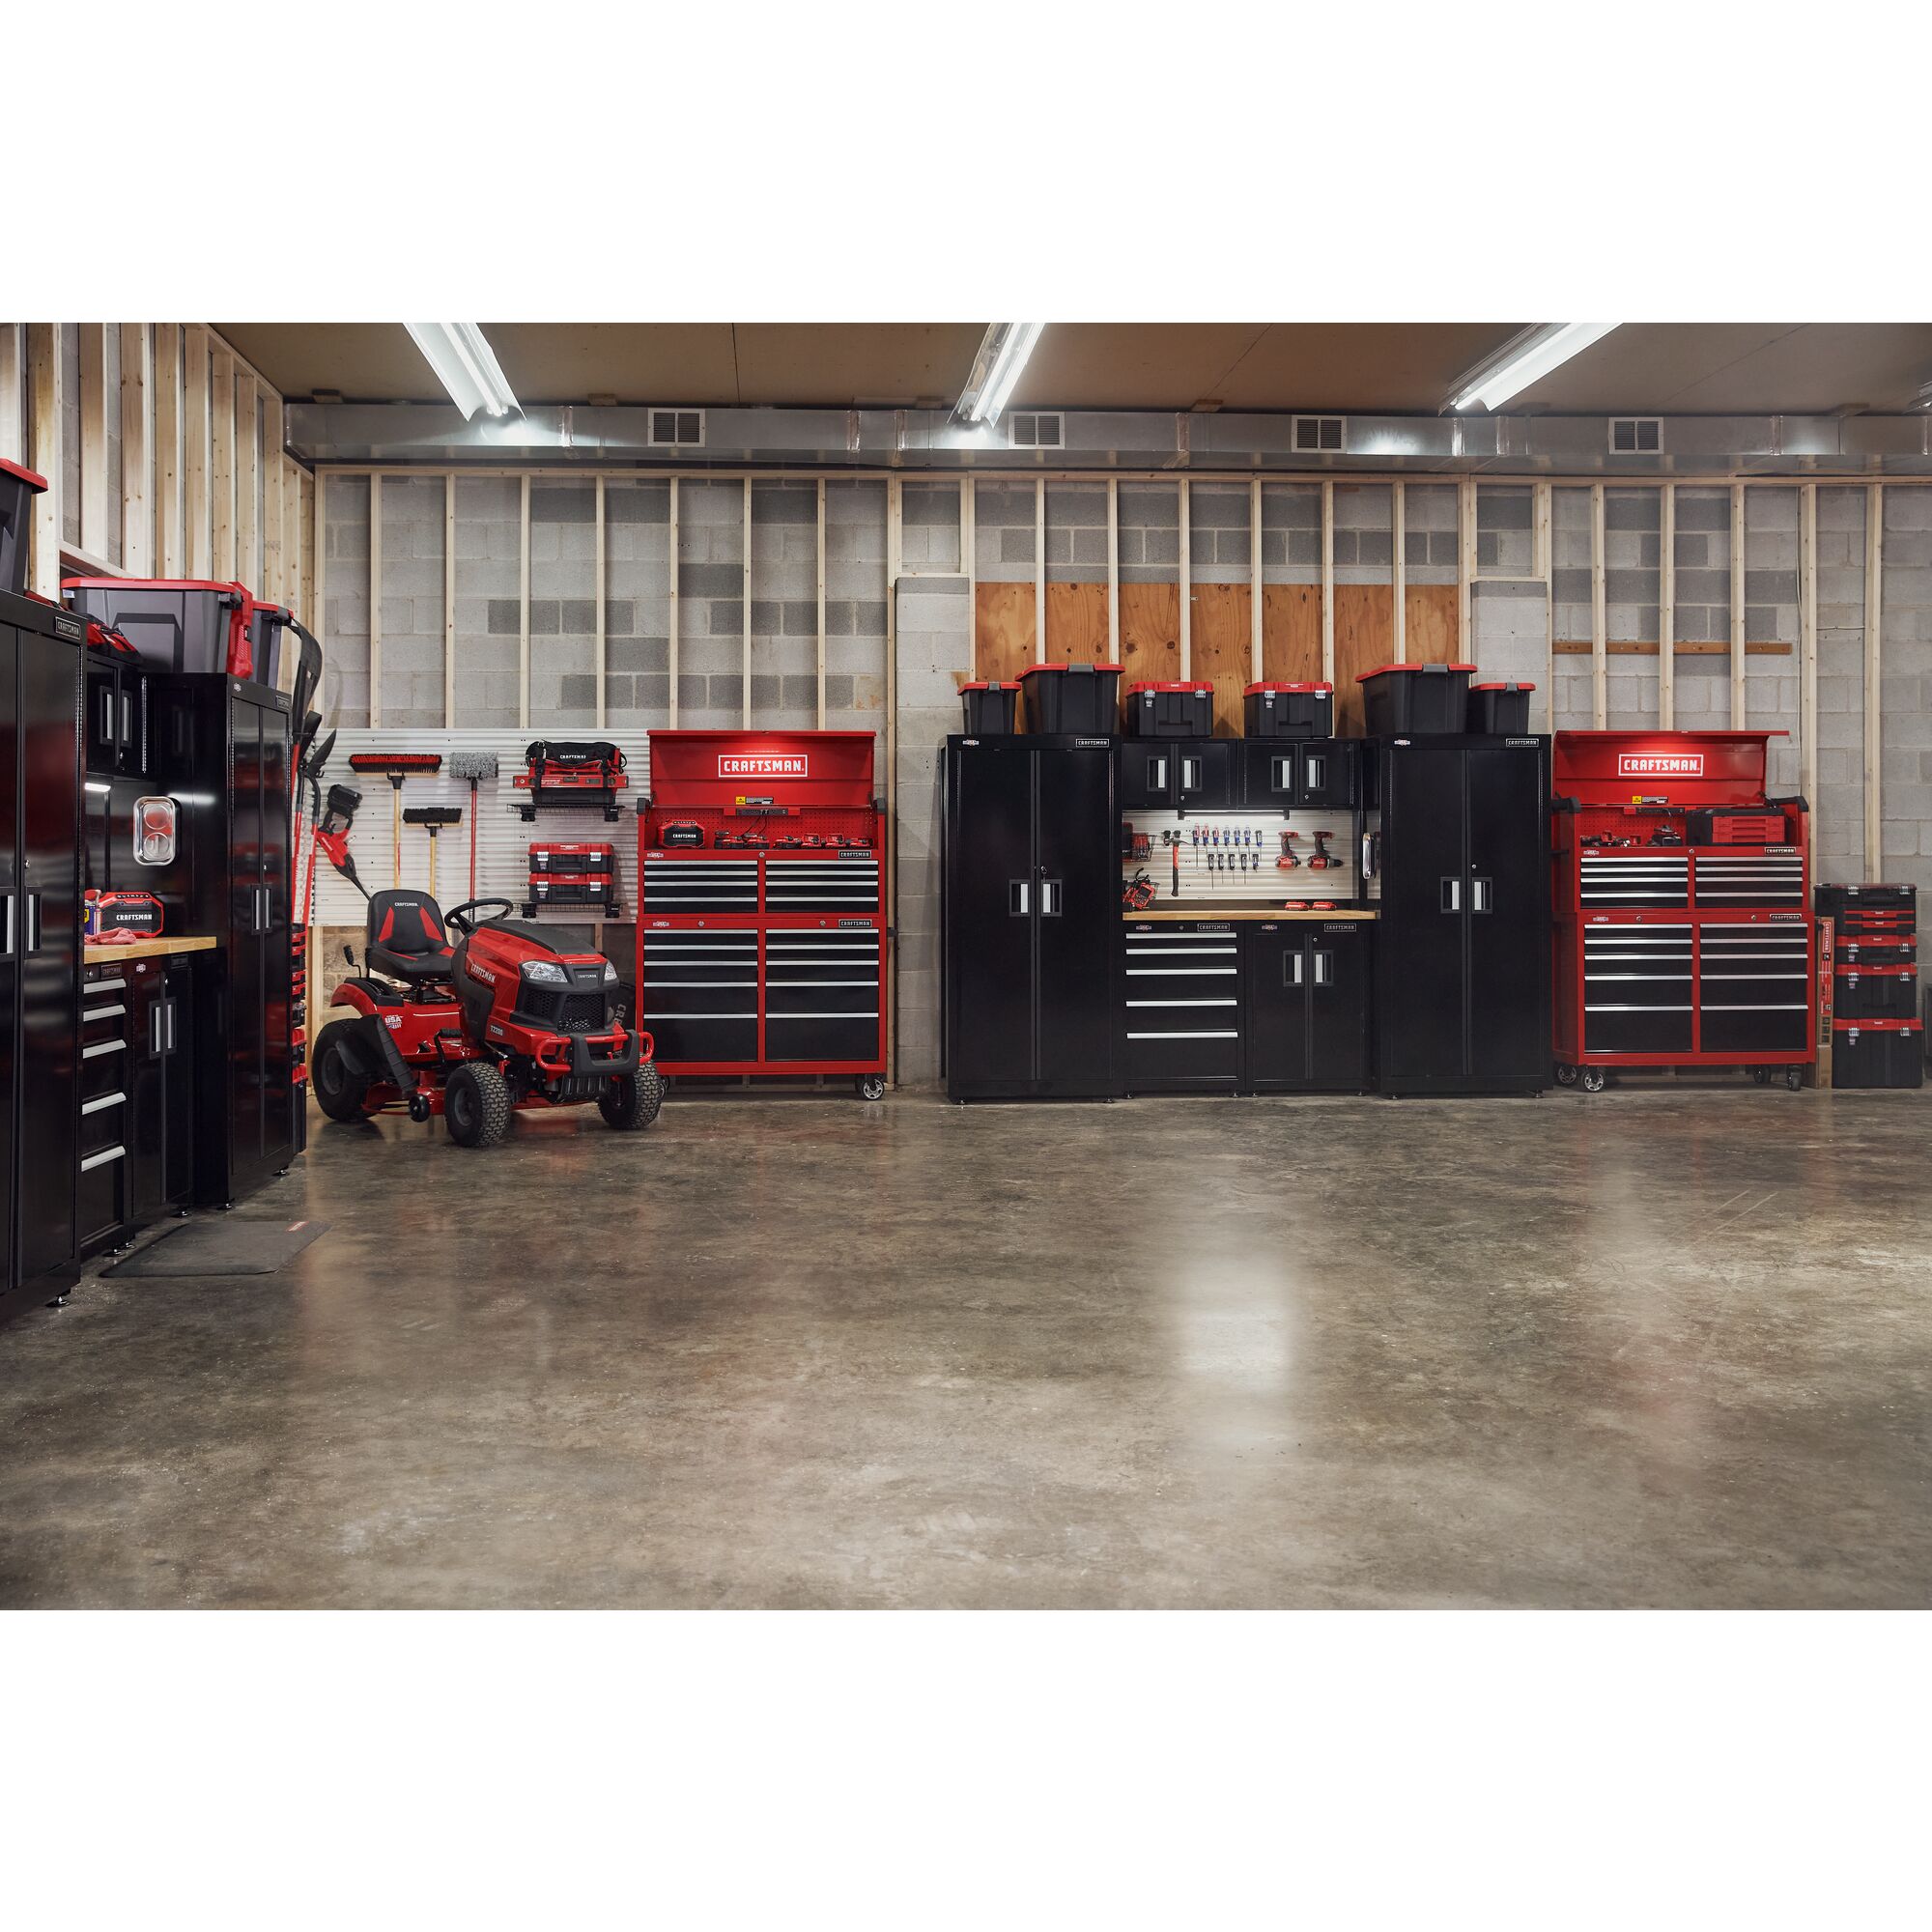 View of CRAFTSMAN Pressure Washers family of products